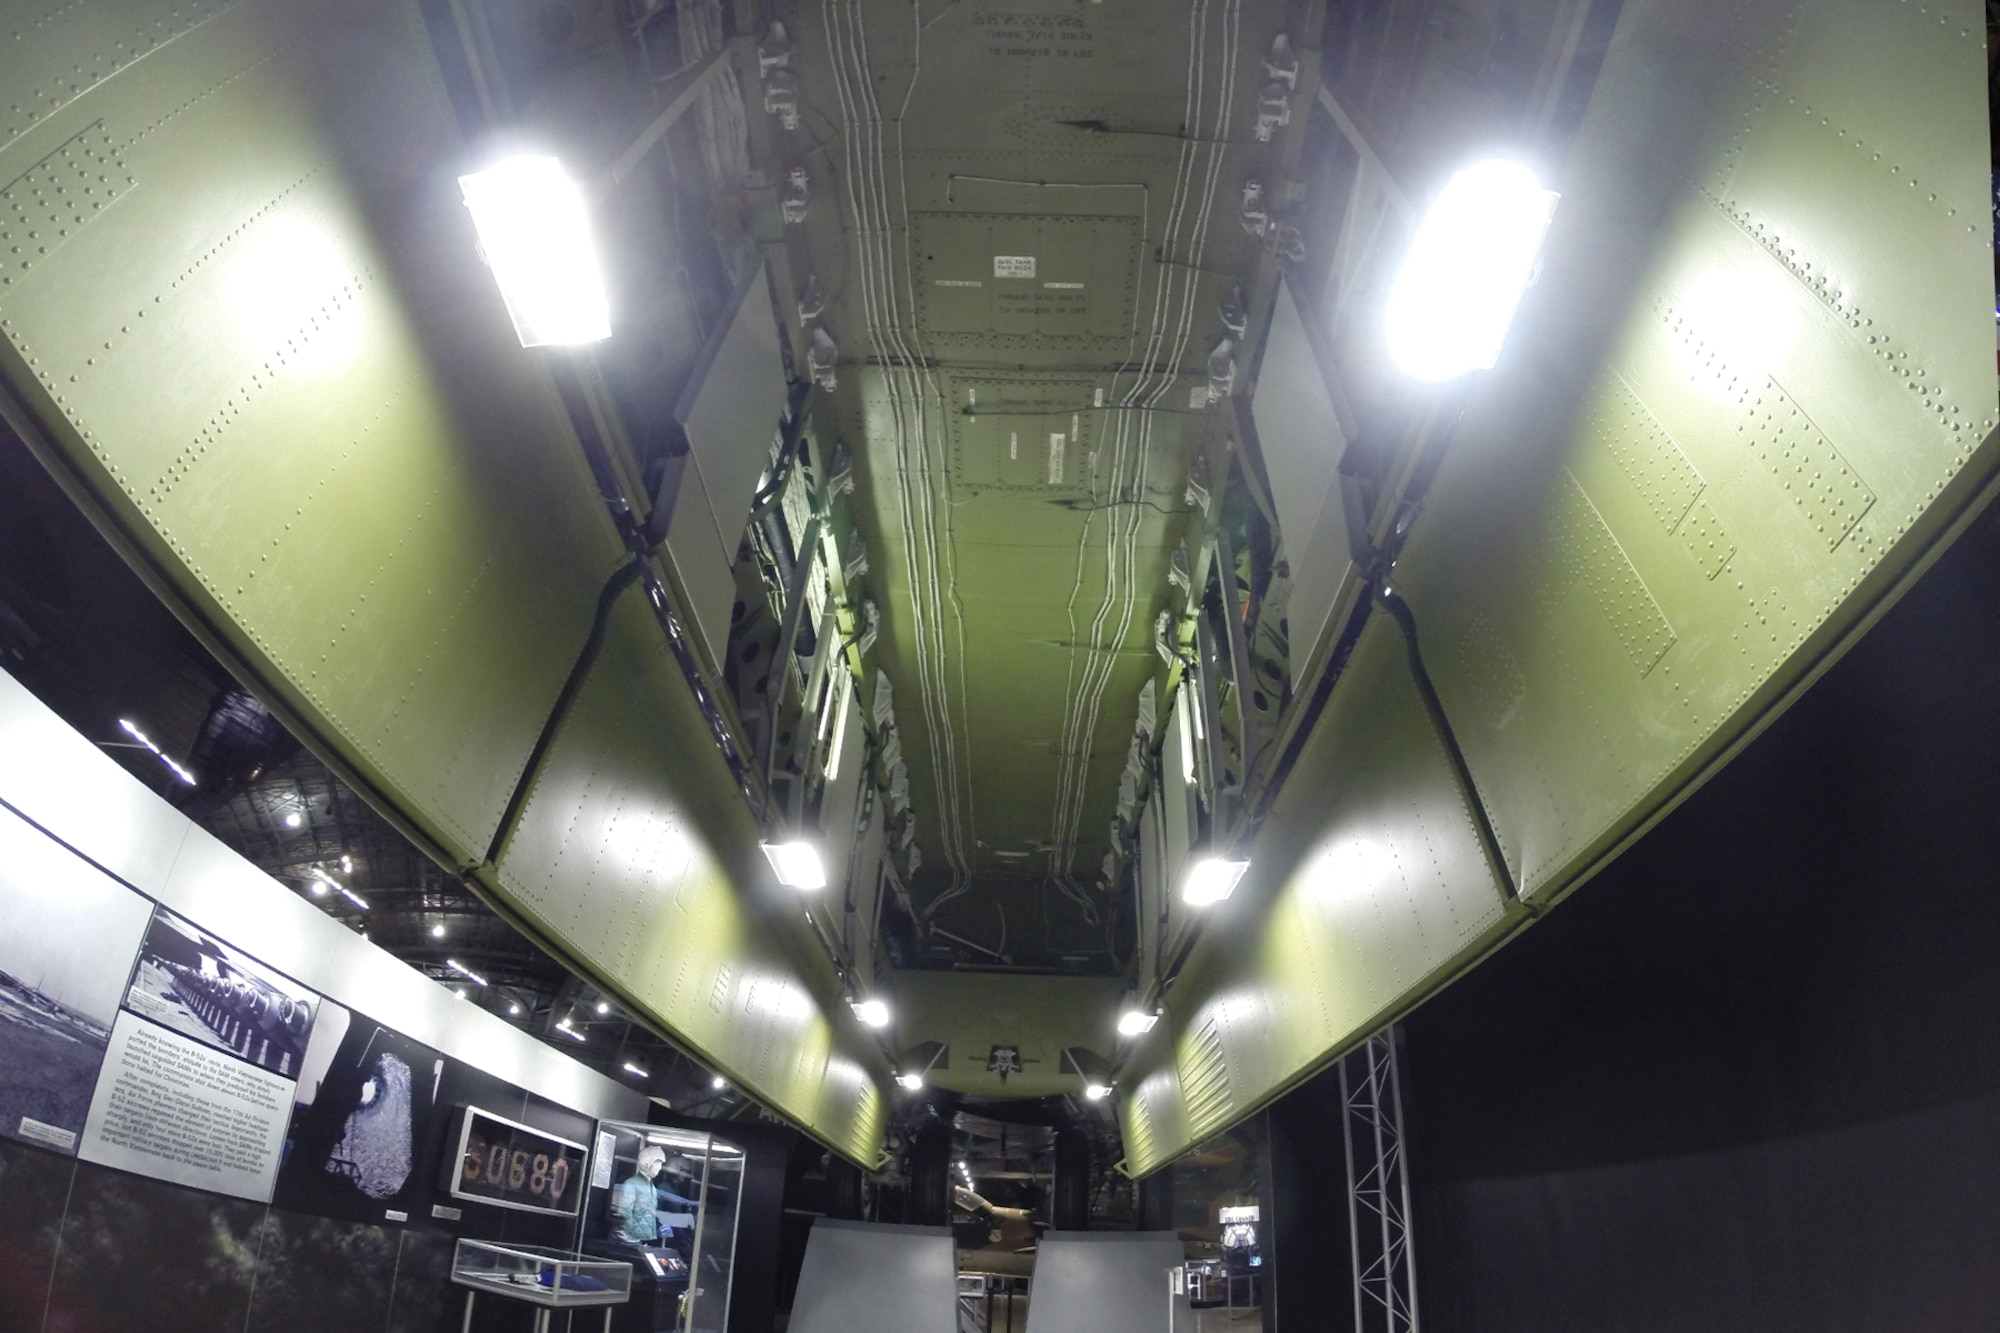 Boeing B-52D Stratofortress payload bay in the Southeast Asia War Gallery at the National Museum of the United States Air Force. (U.S. Air Force photo)